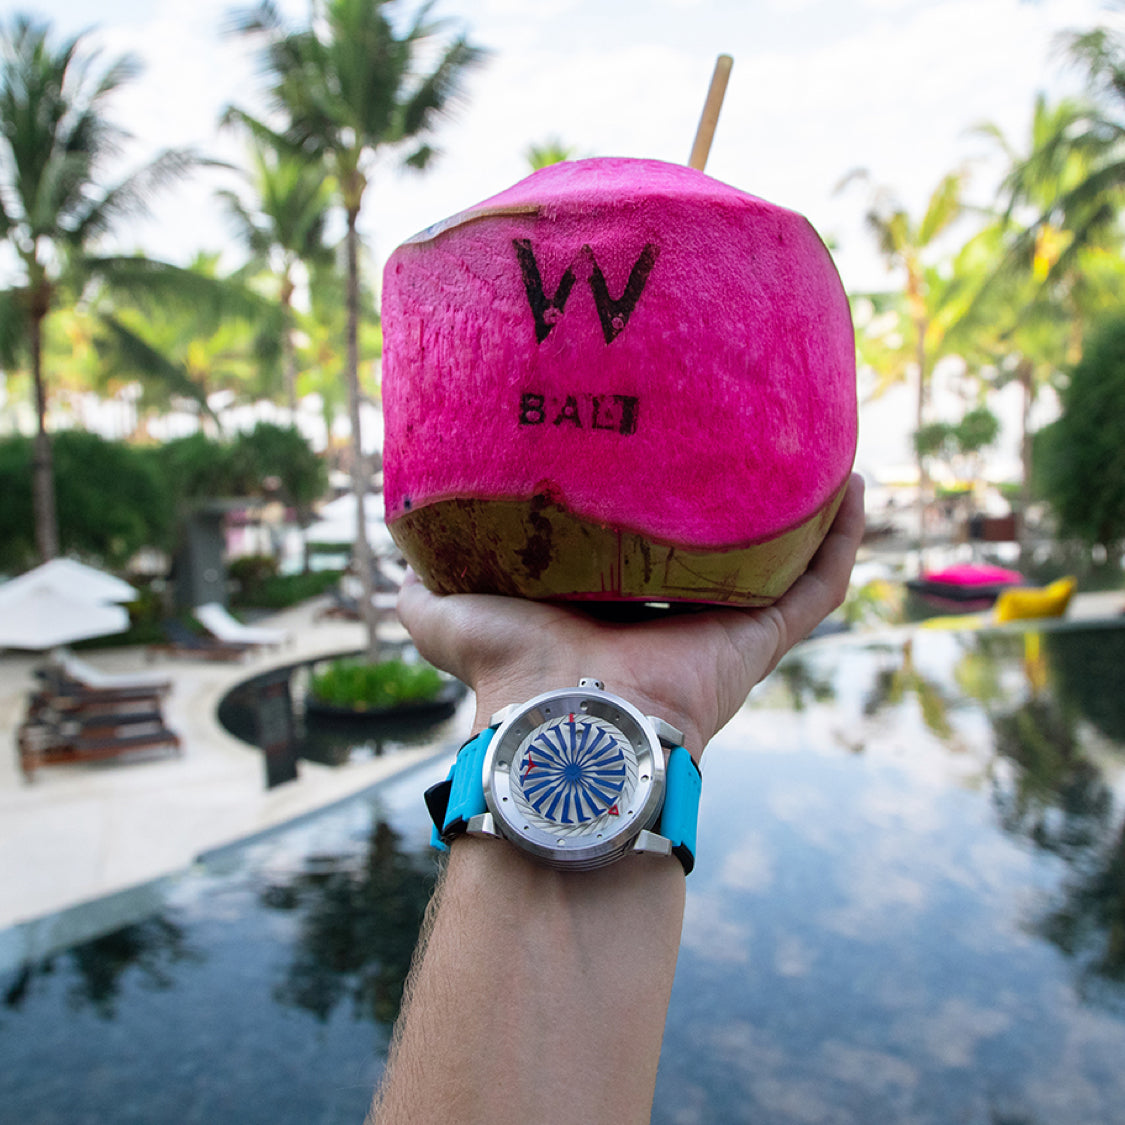 #ZINVADERS: Relax and Unwind with us in Bali!